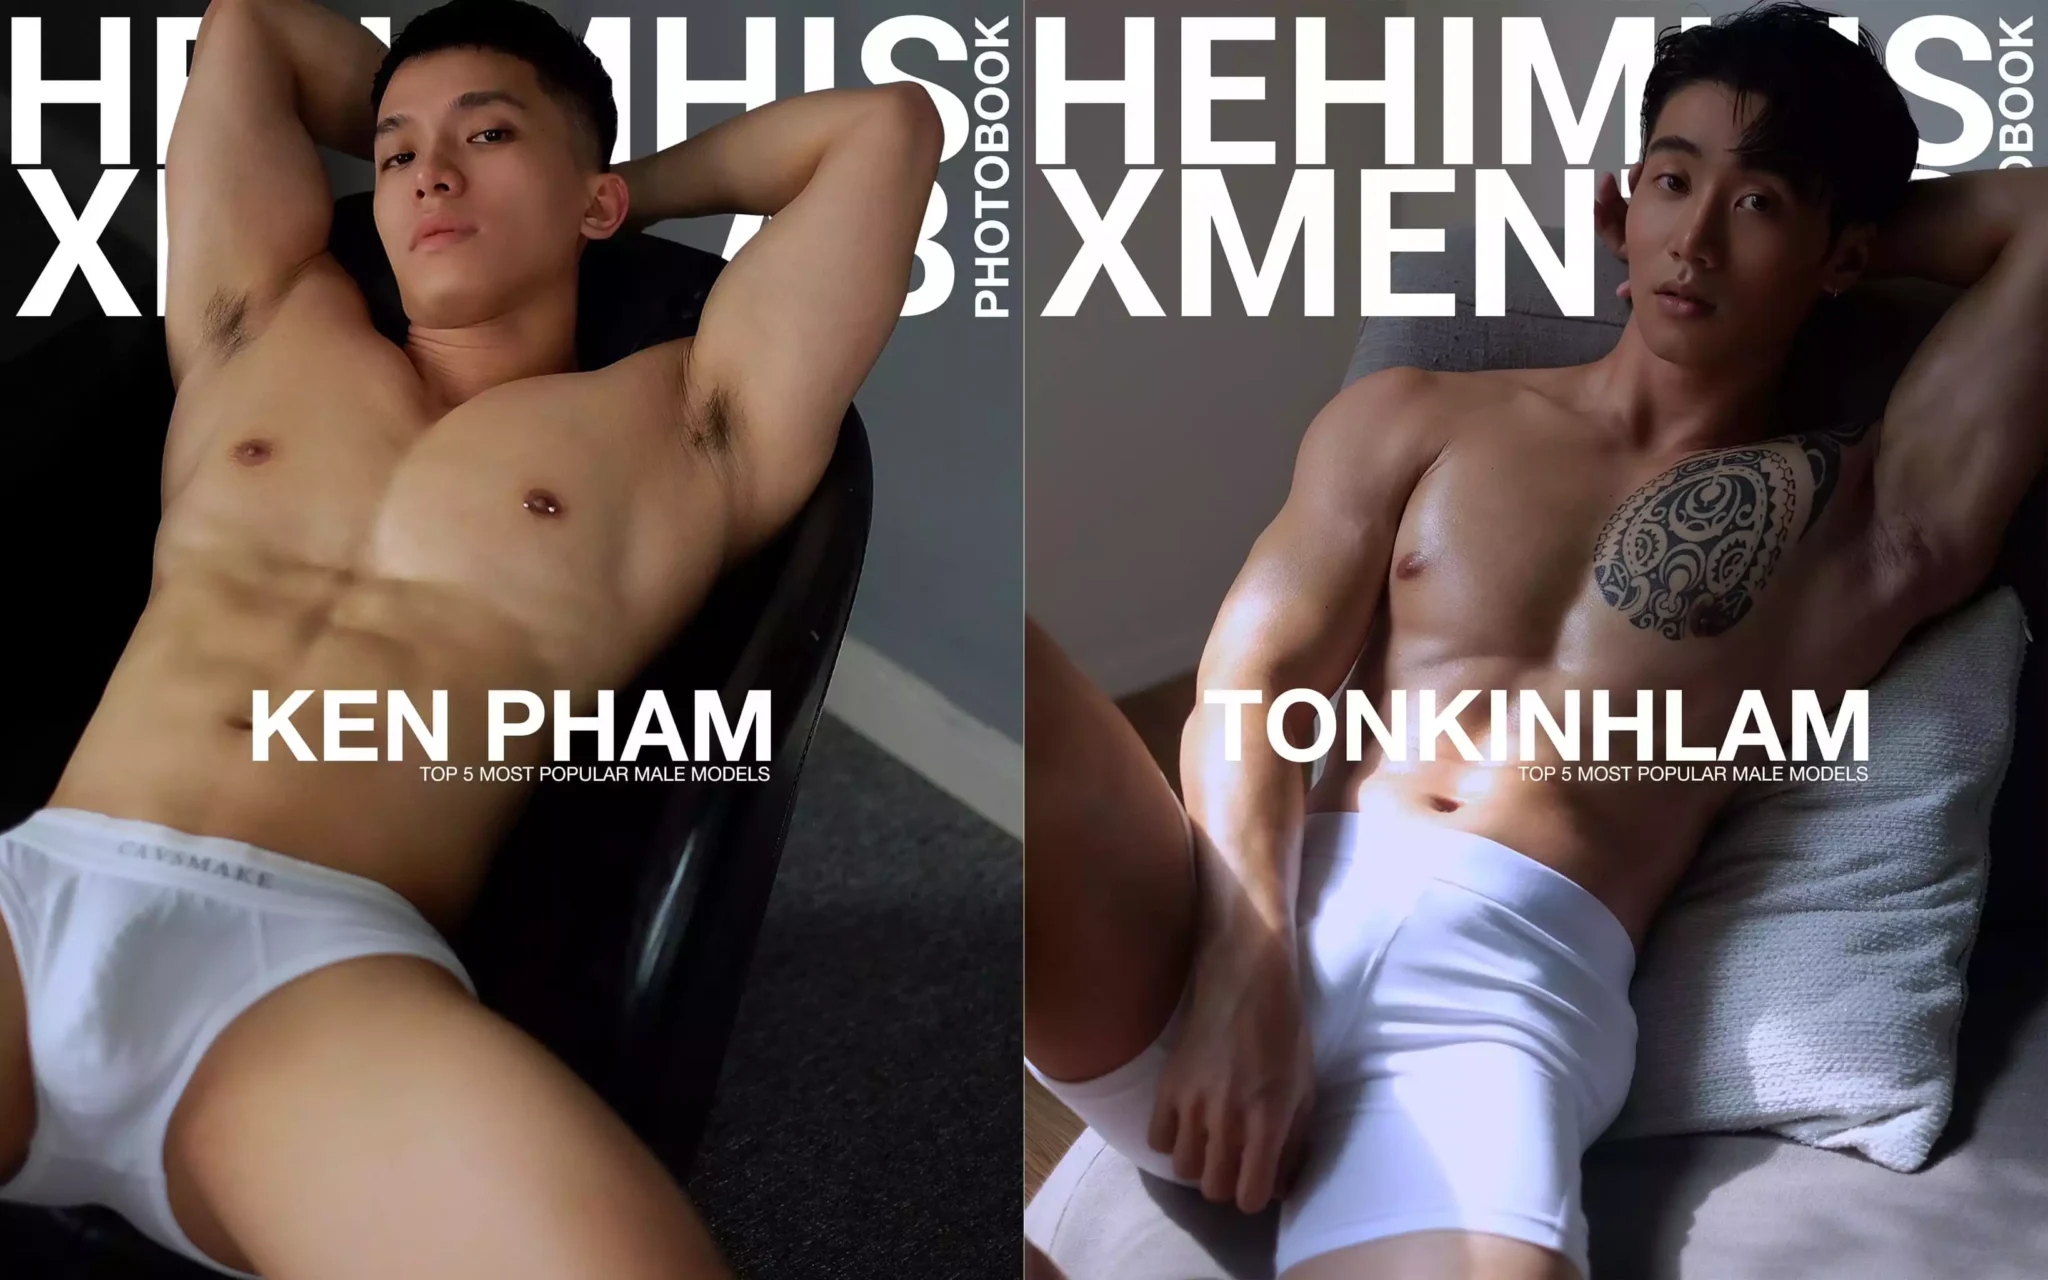 HeHimHis Xmenlab Collection P1